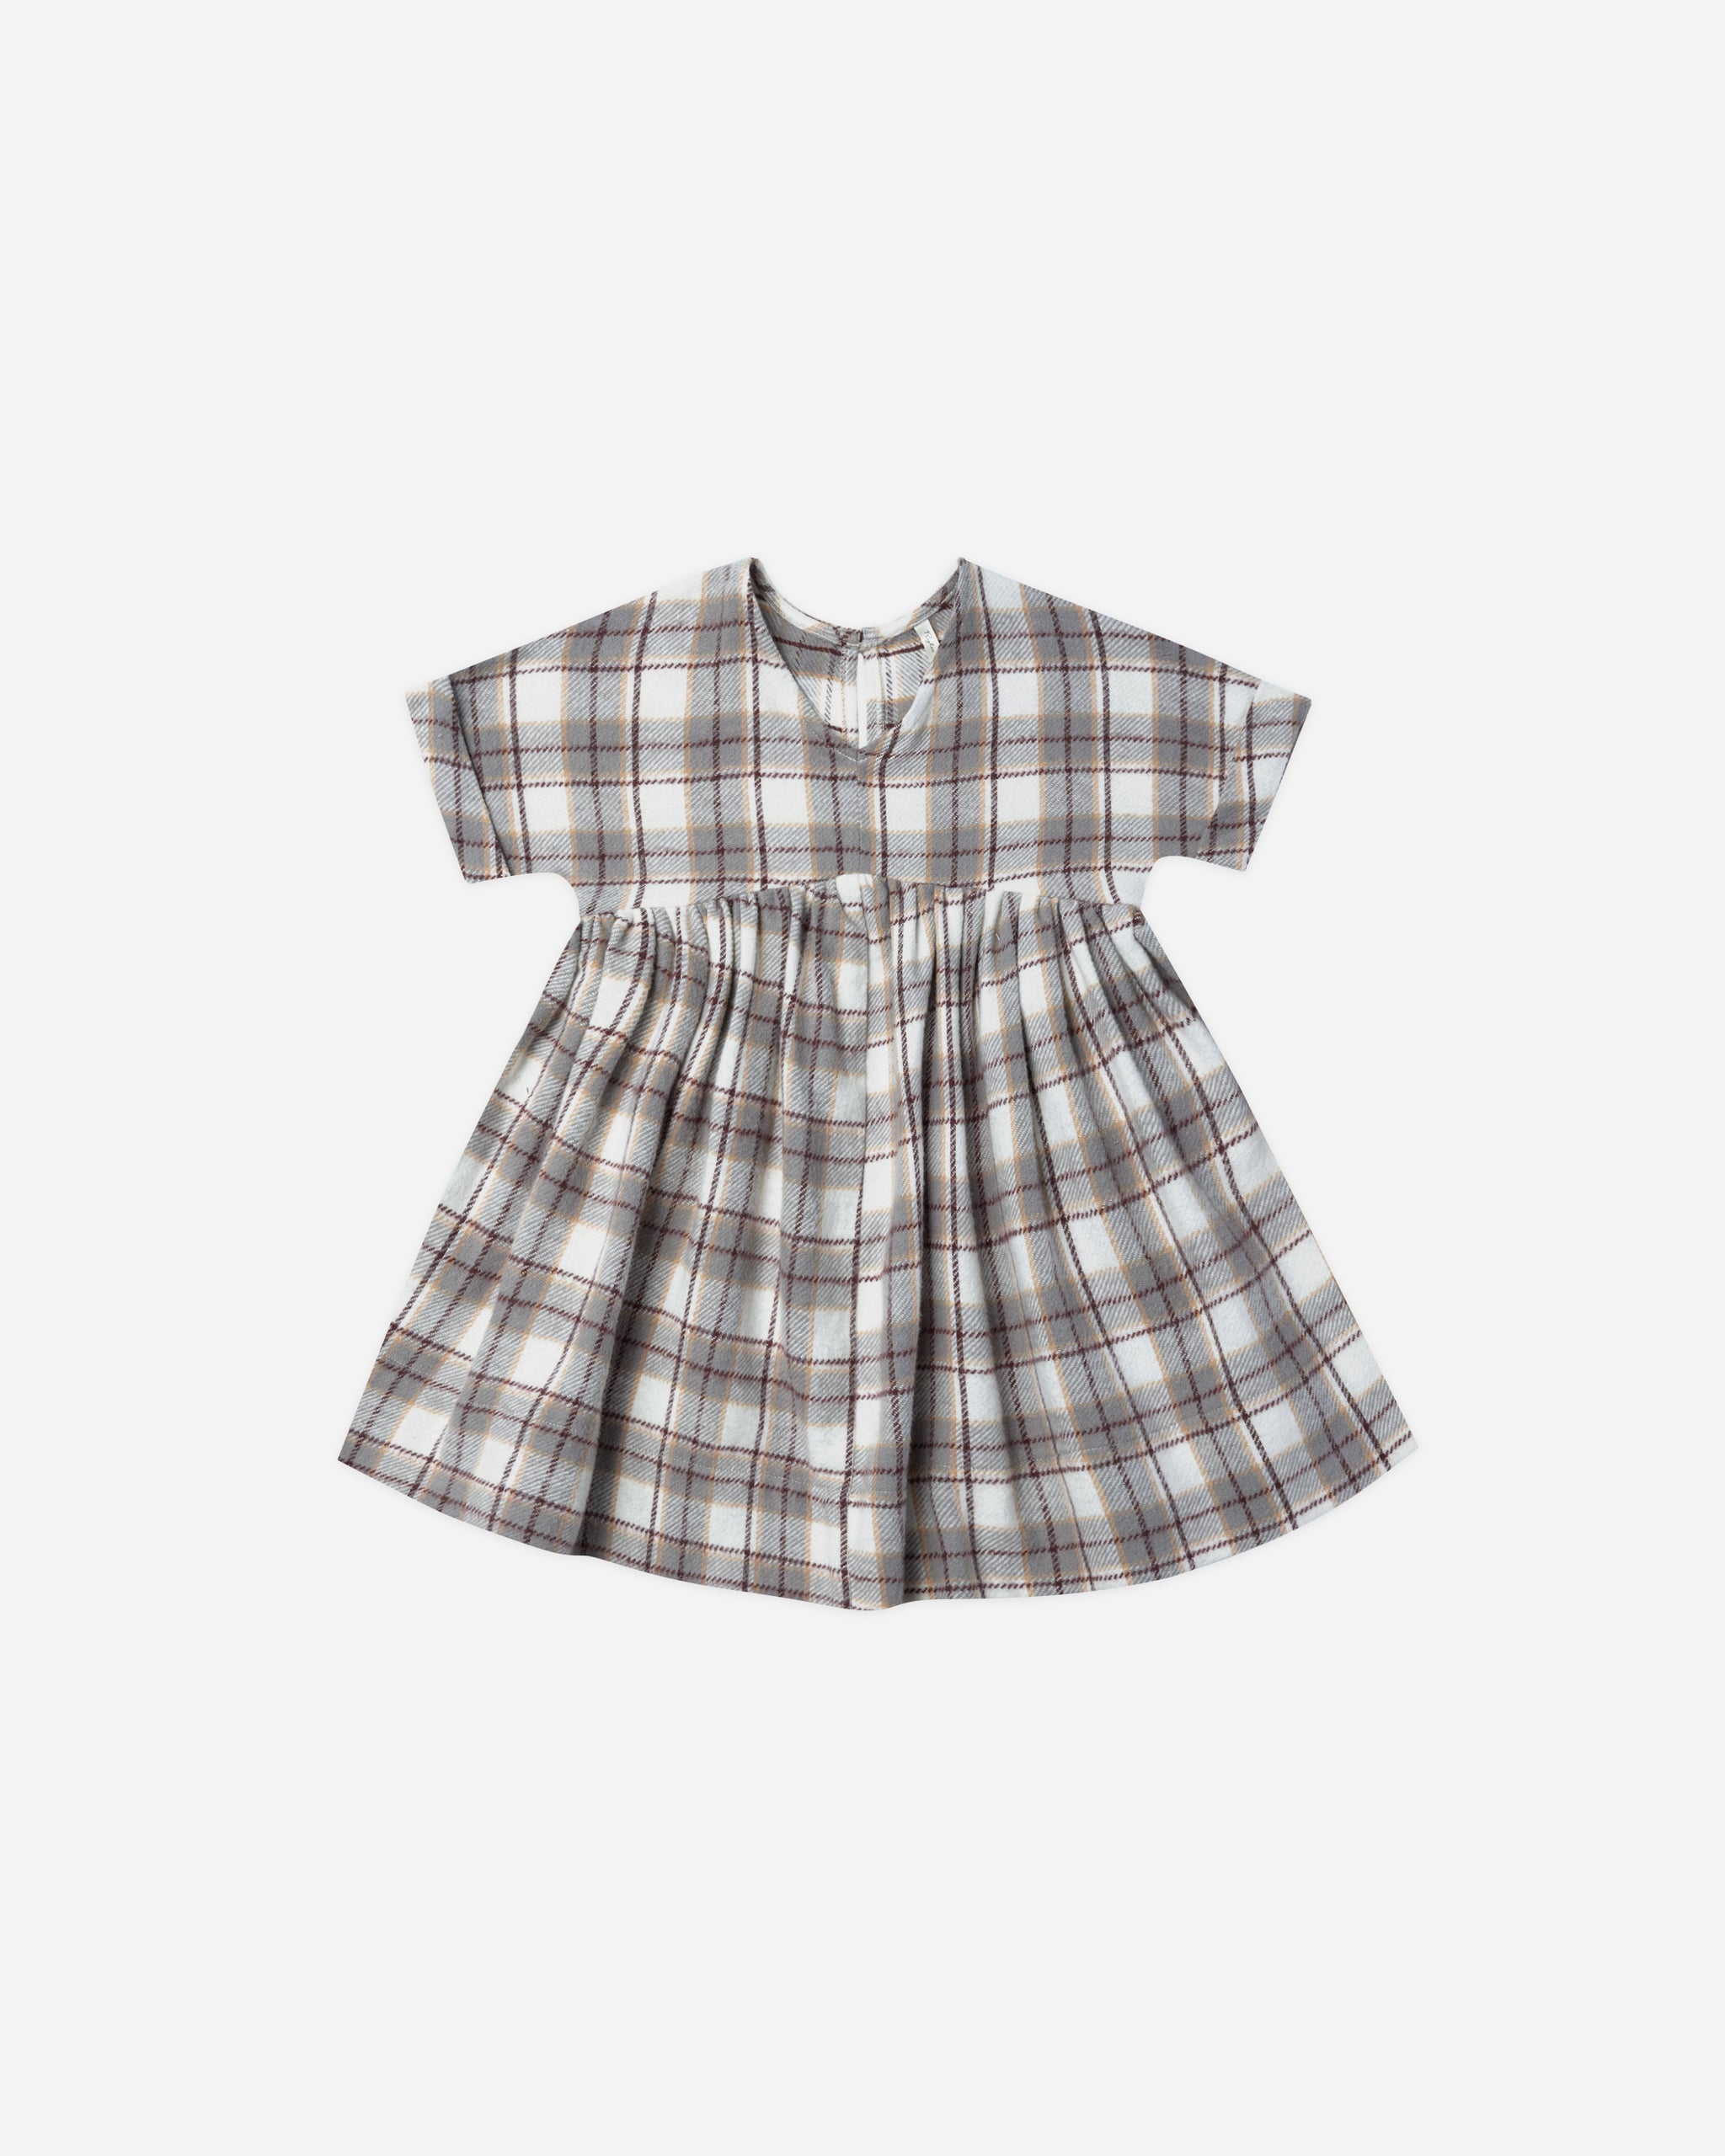 Maxwell Dress || Blue Flannel - Rylee + Cru | Kids Clothes | Trendy Baby Clothes | Modern Infant Outfits |